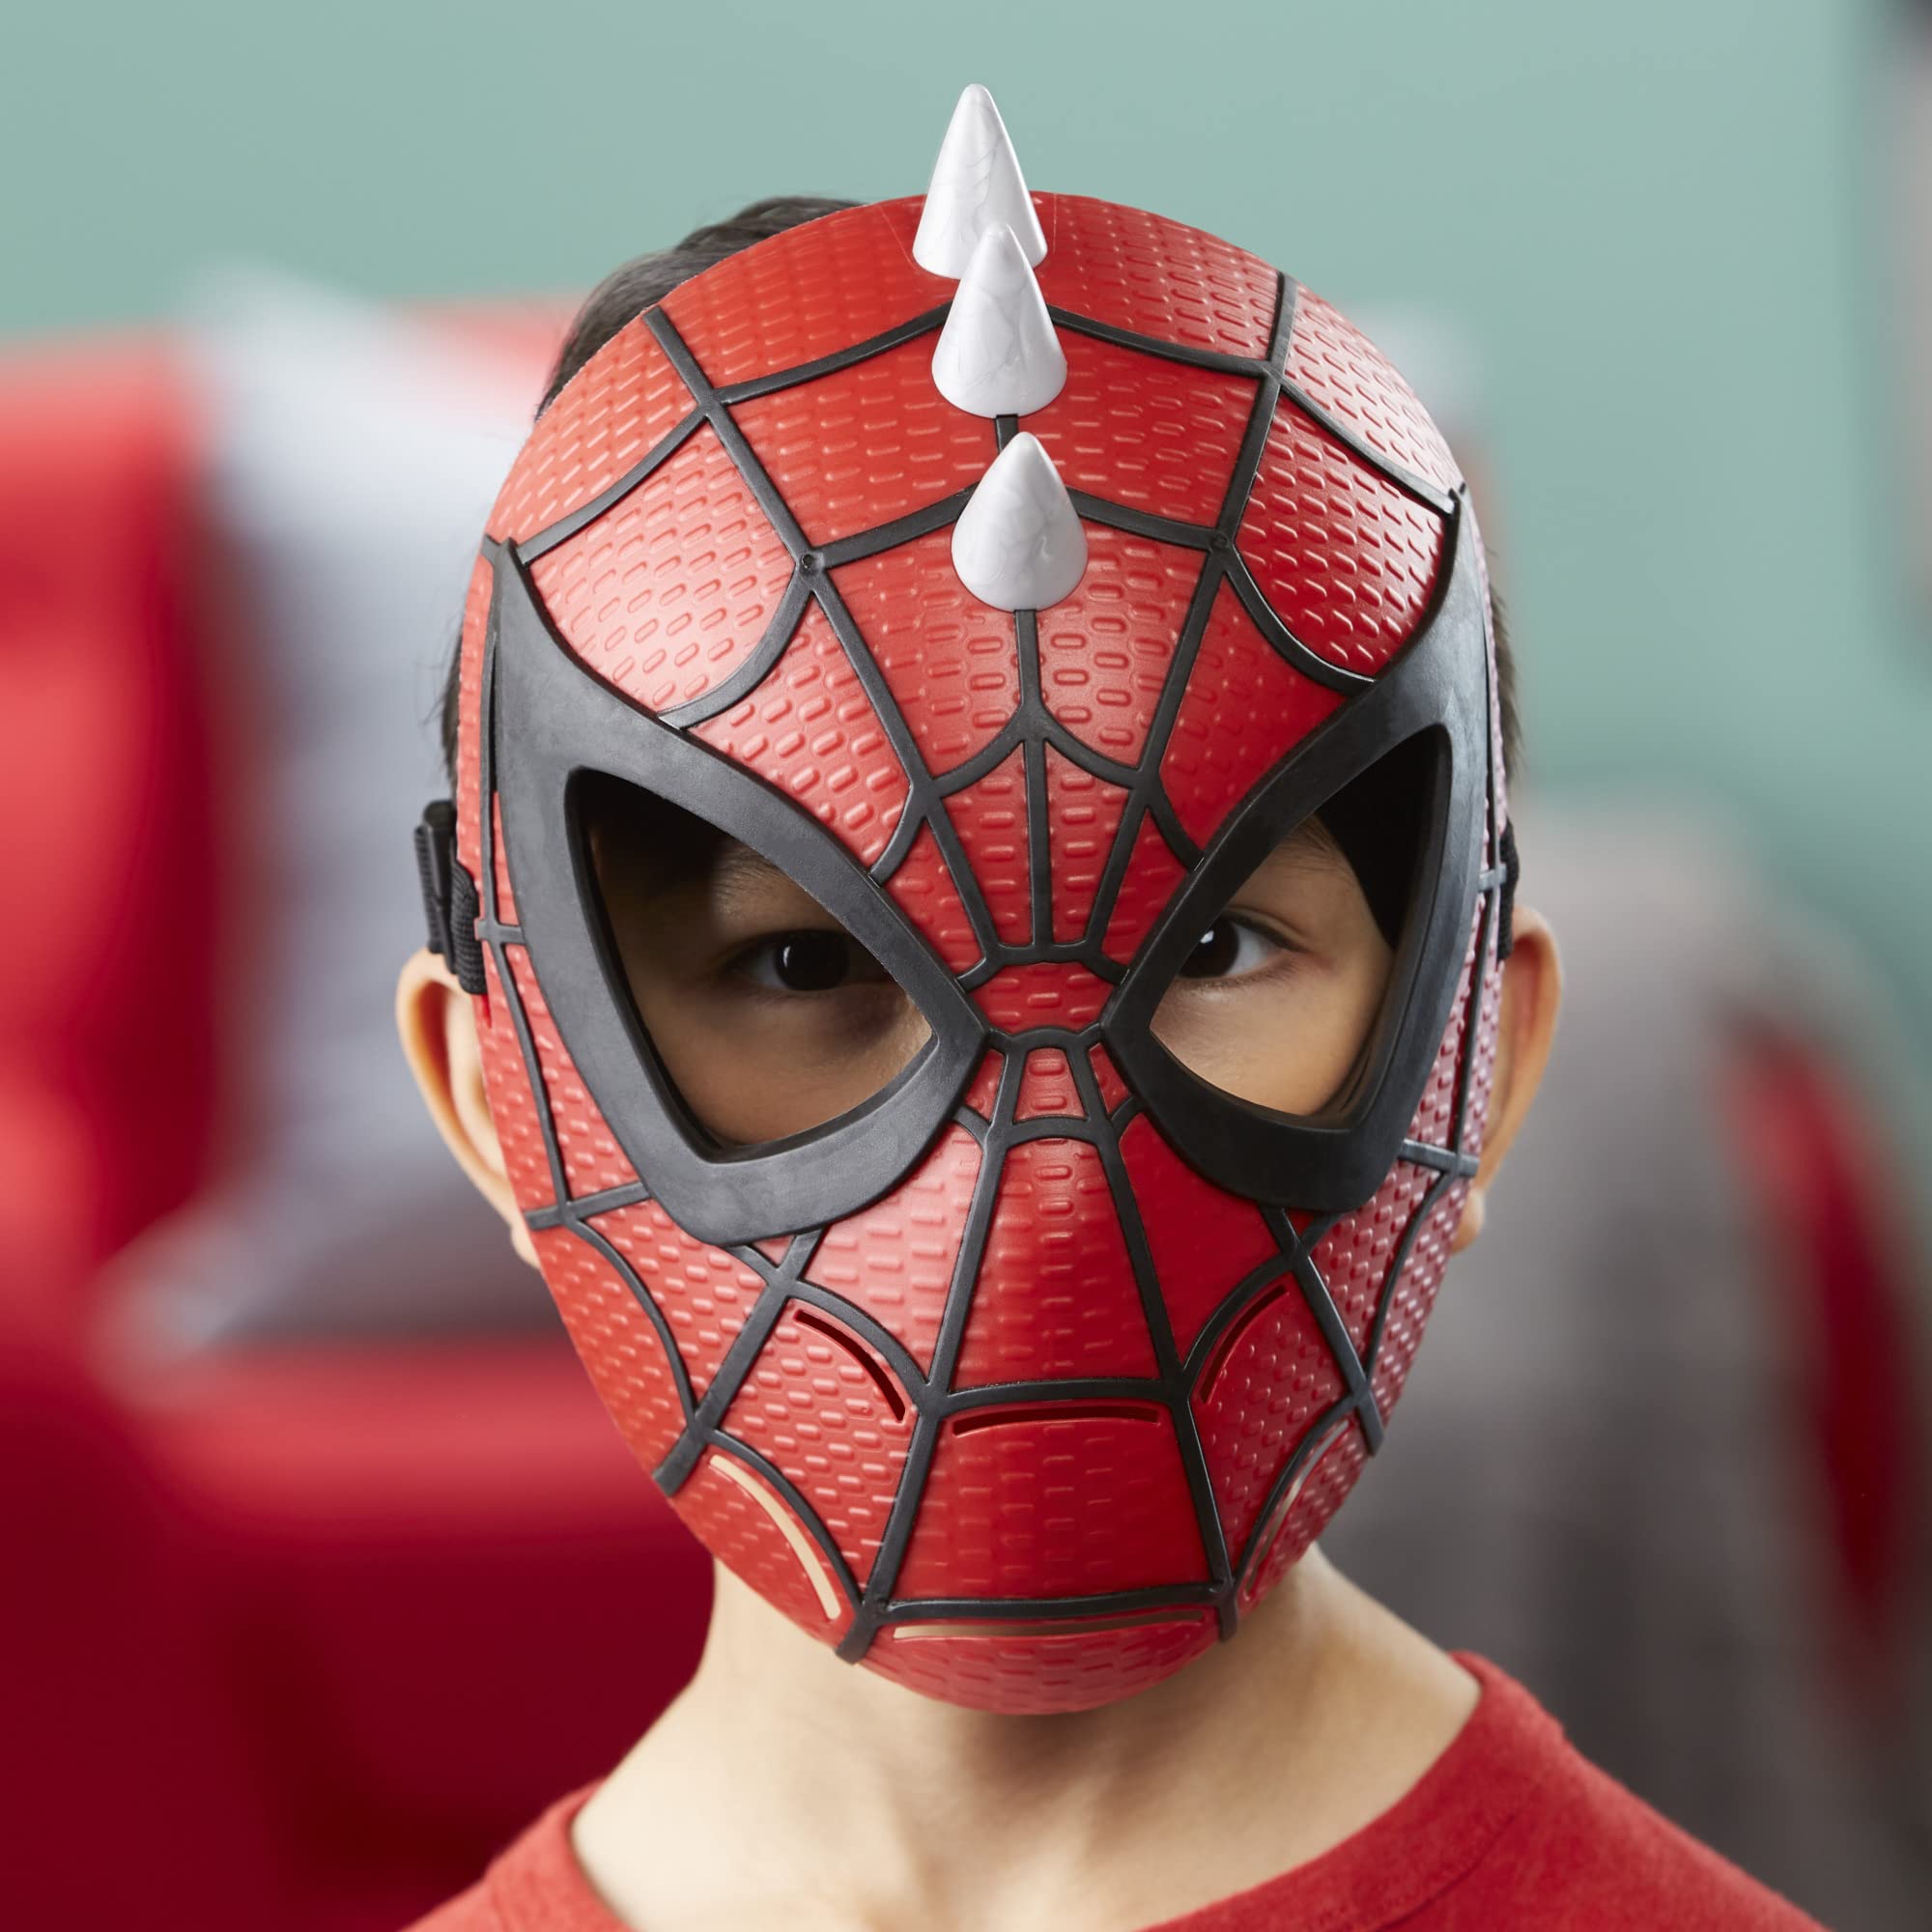 Spider-Man Marvel Across The Spider-Verse Spider-Punk Mask for Kids Roleplay and Costume Dress Up, Marvel Toys for Kids Ages 5 and Up,Red, Black